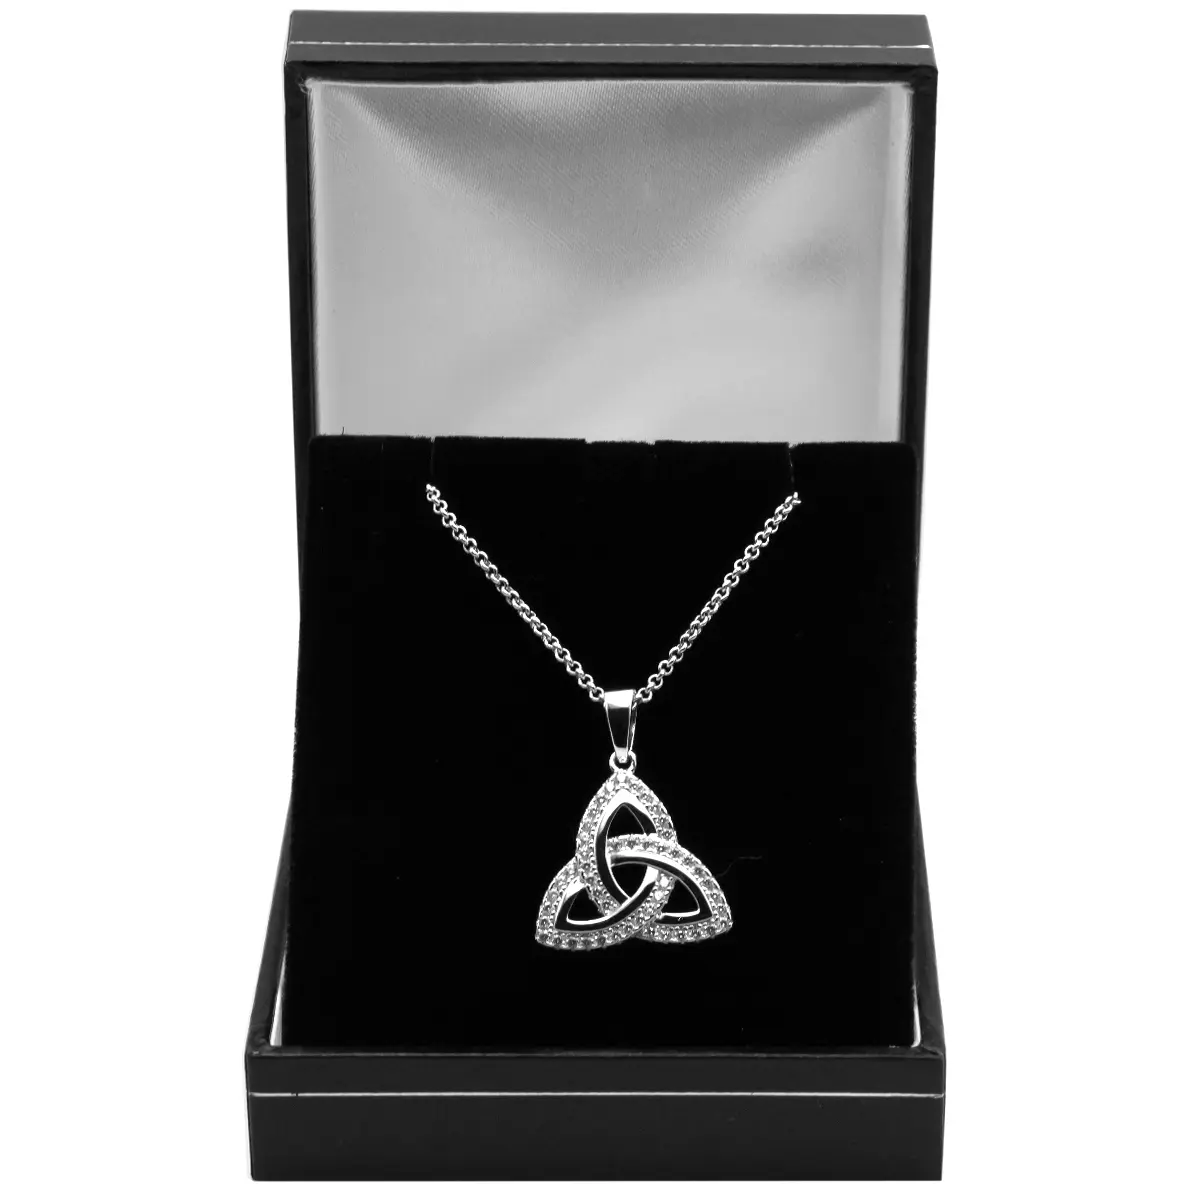 Sterling Silver Trinity Knot Pendant Inlaid With Cubic Zirconia Gemstones 11...